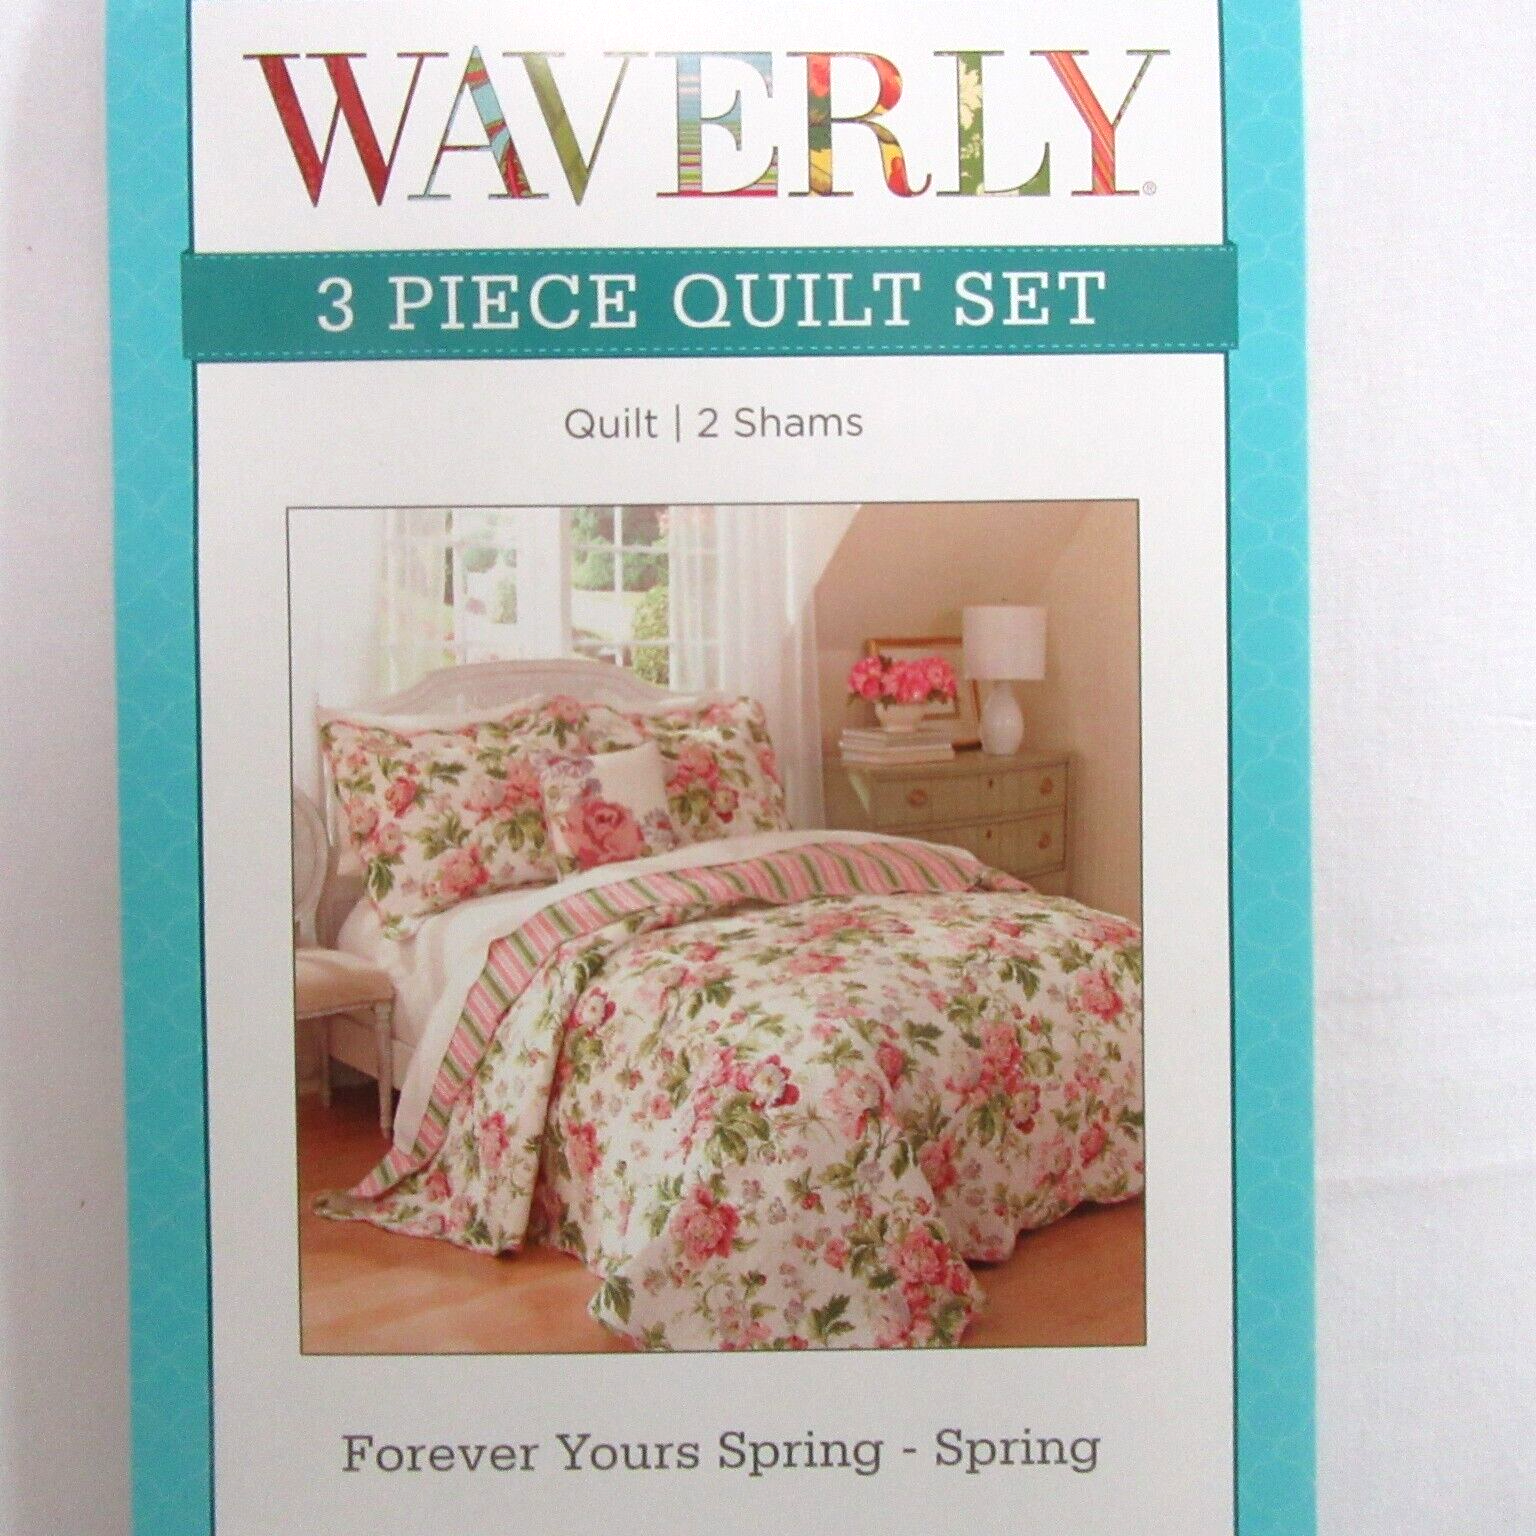 Waverly Forever Yours Spring Pink Floral 3-PC Scalloped King Quilt Set - $220.00